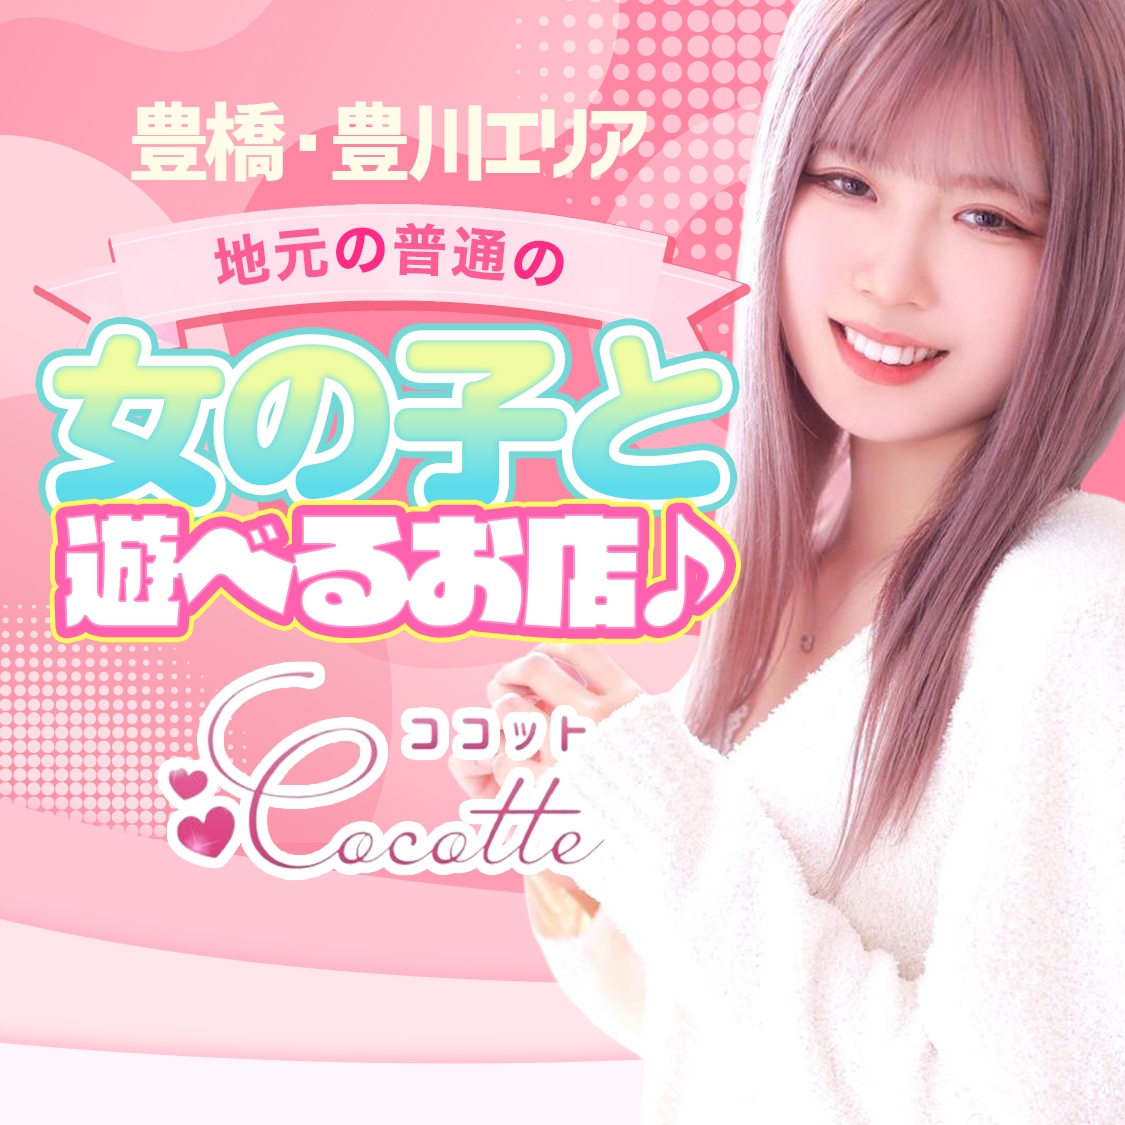 cocotteーココットー